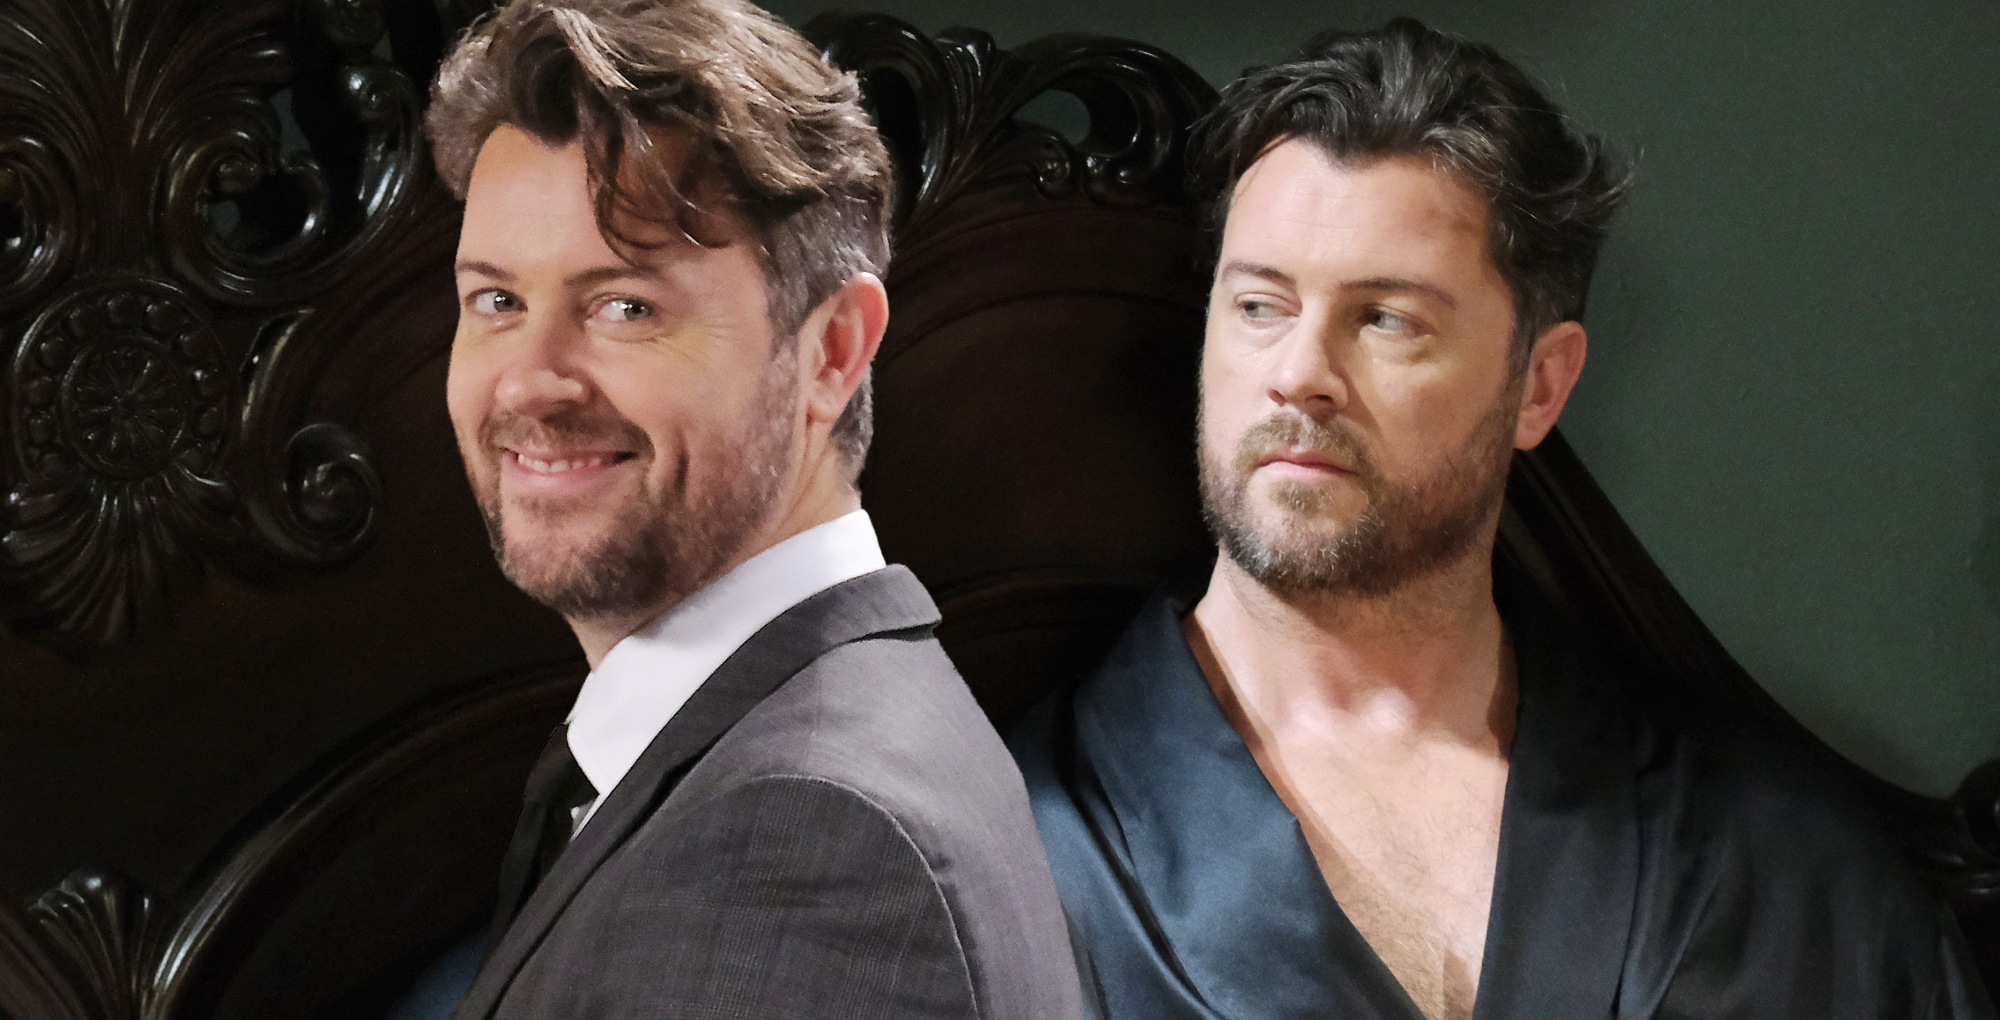 actor dan feuerriegel wearing a suit and as ej dimera on days of our lives wearing a robe